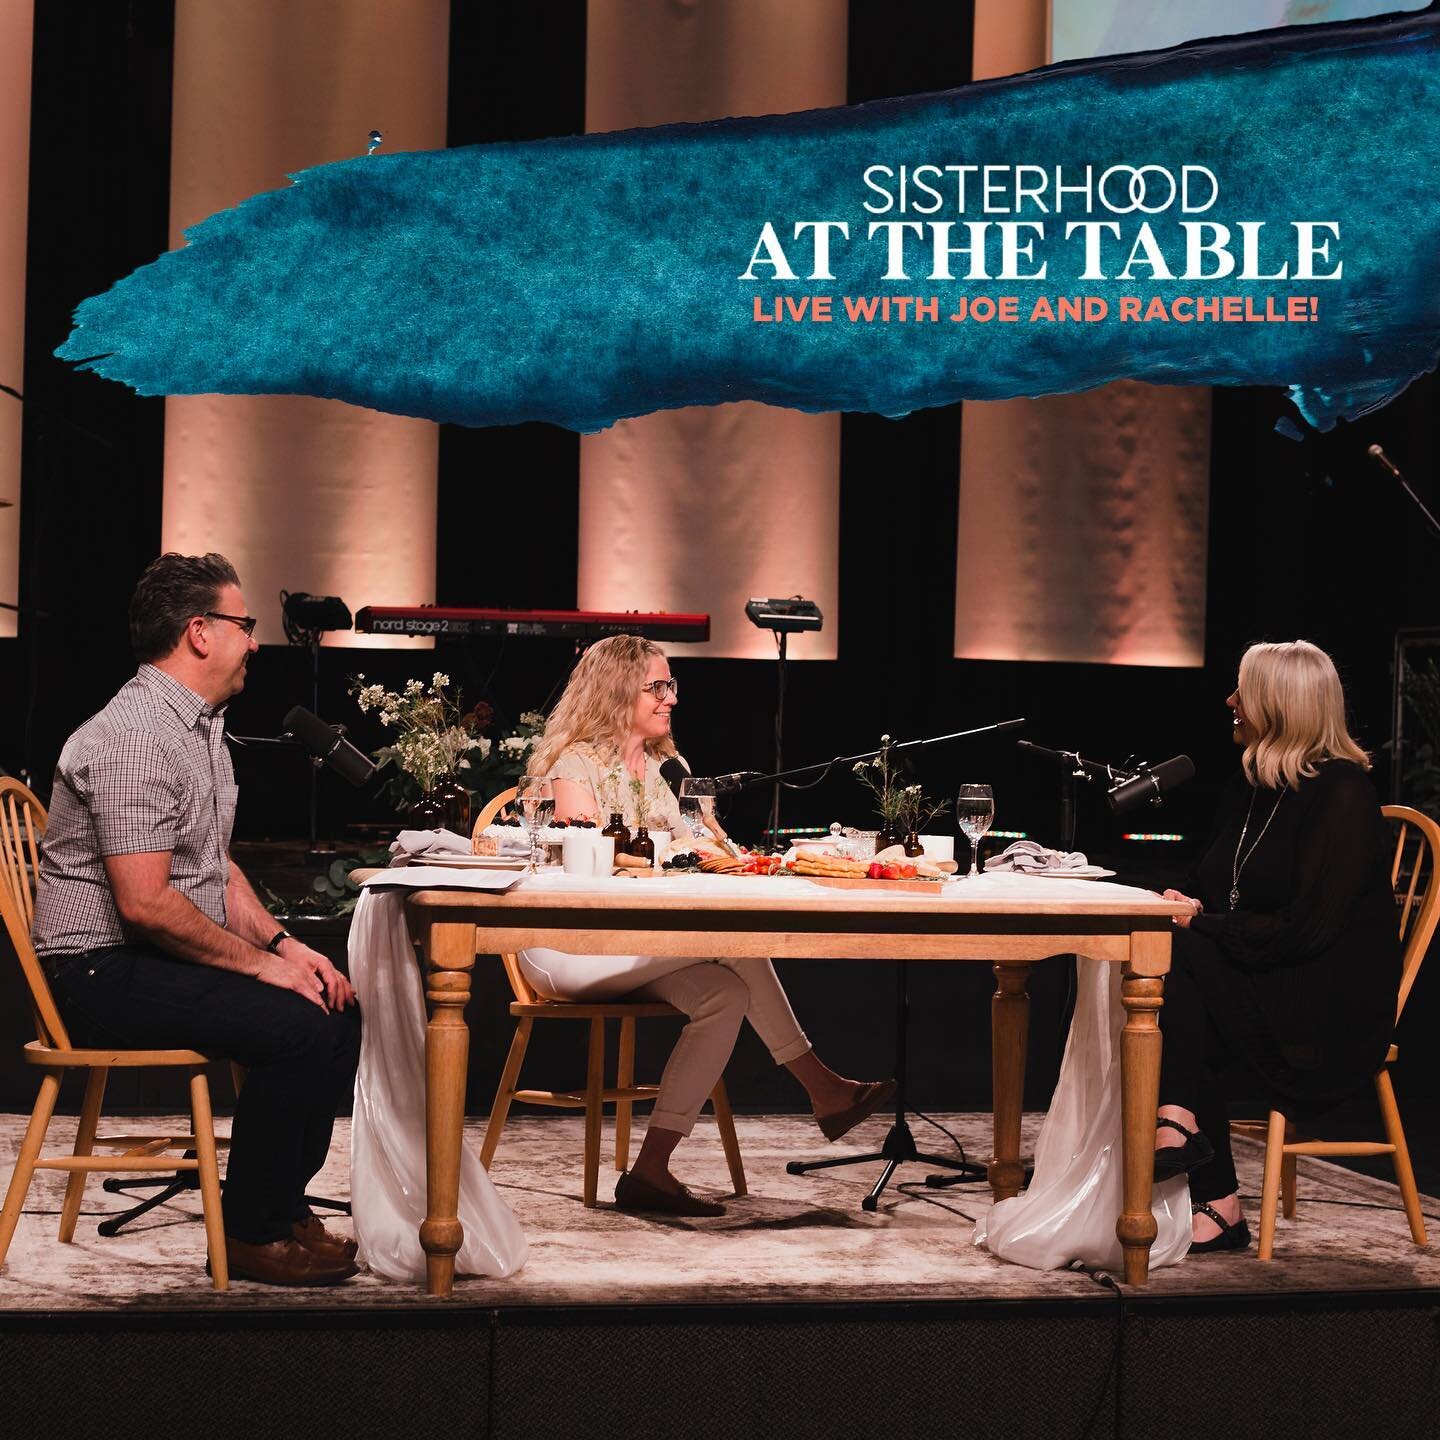 If you know us, you know this: we LOVE a good conversation. On Saturday, June 5th, we were honoured to film a special live episode of the Sisterhood At The Table podcast at Sisterhood Conference: The Online Experience. Our host, Helen Burns, was join